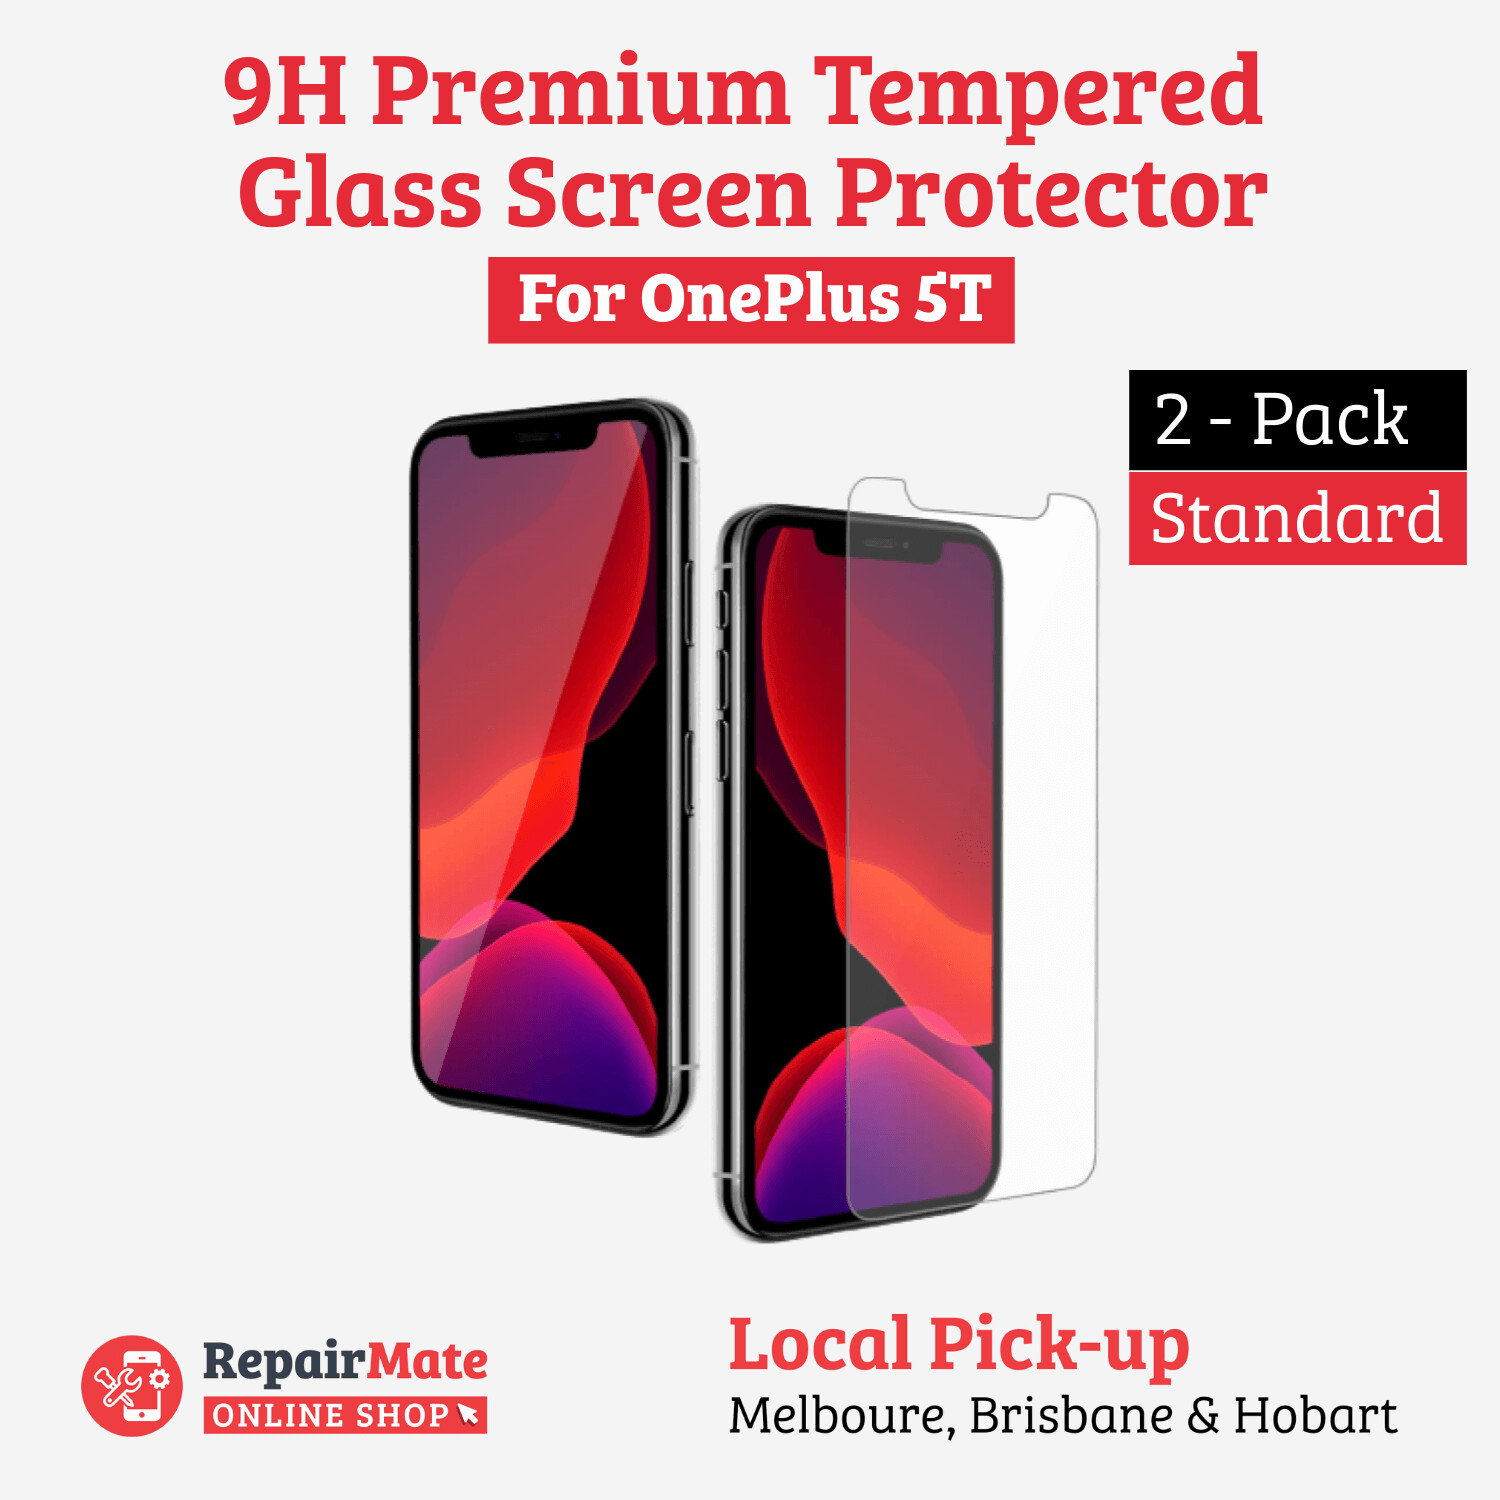 OnePlus 5T 9H Premium Tempered Glass Screen Protector [2 Pack]